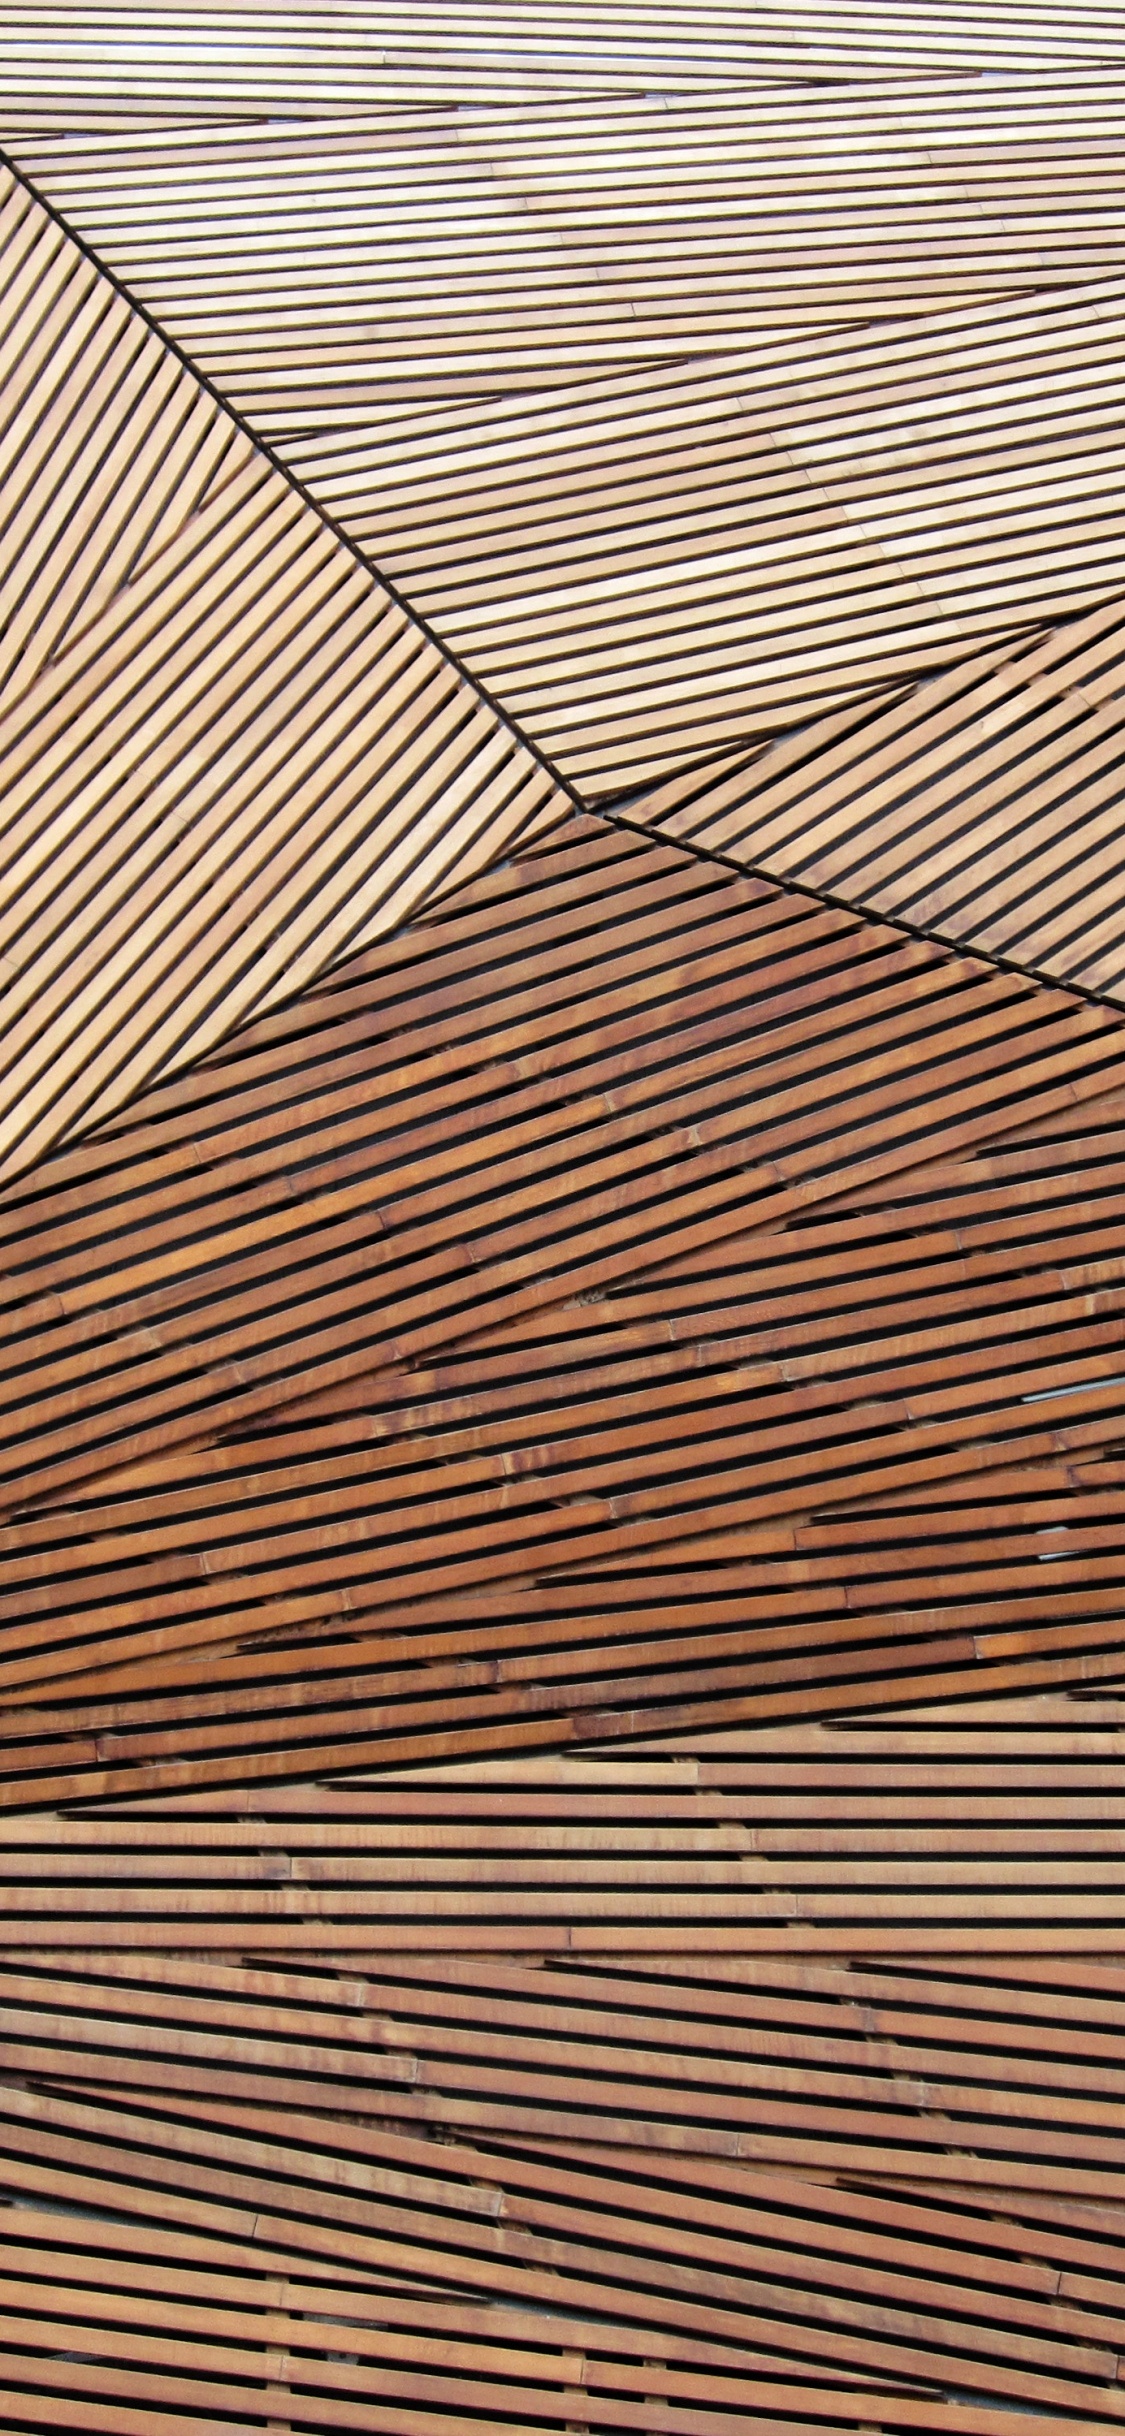 Brown and Black Striped Textile. Wallpaper in 1125x2436 Resolution